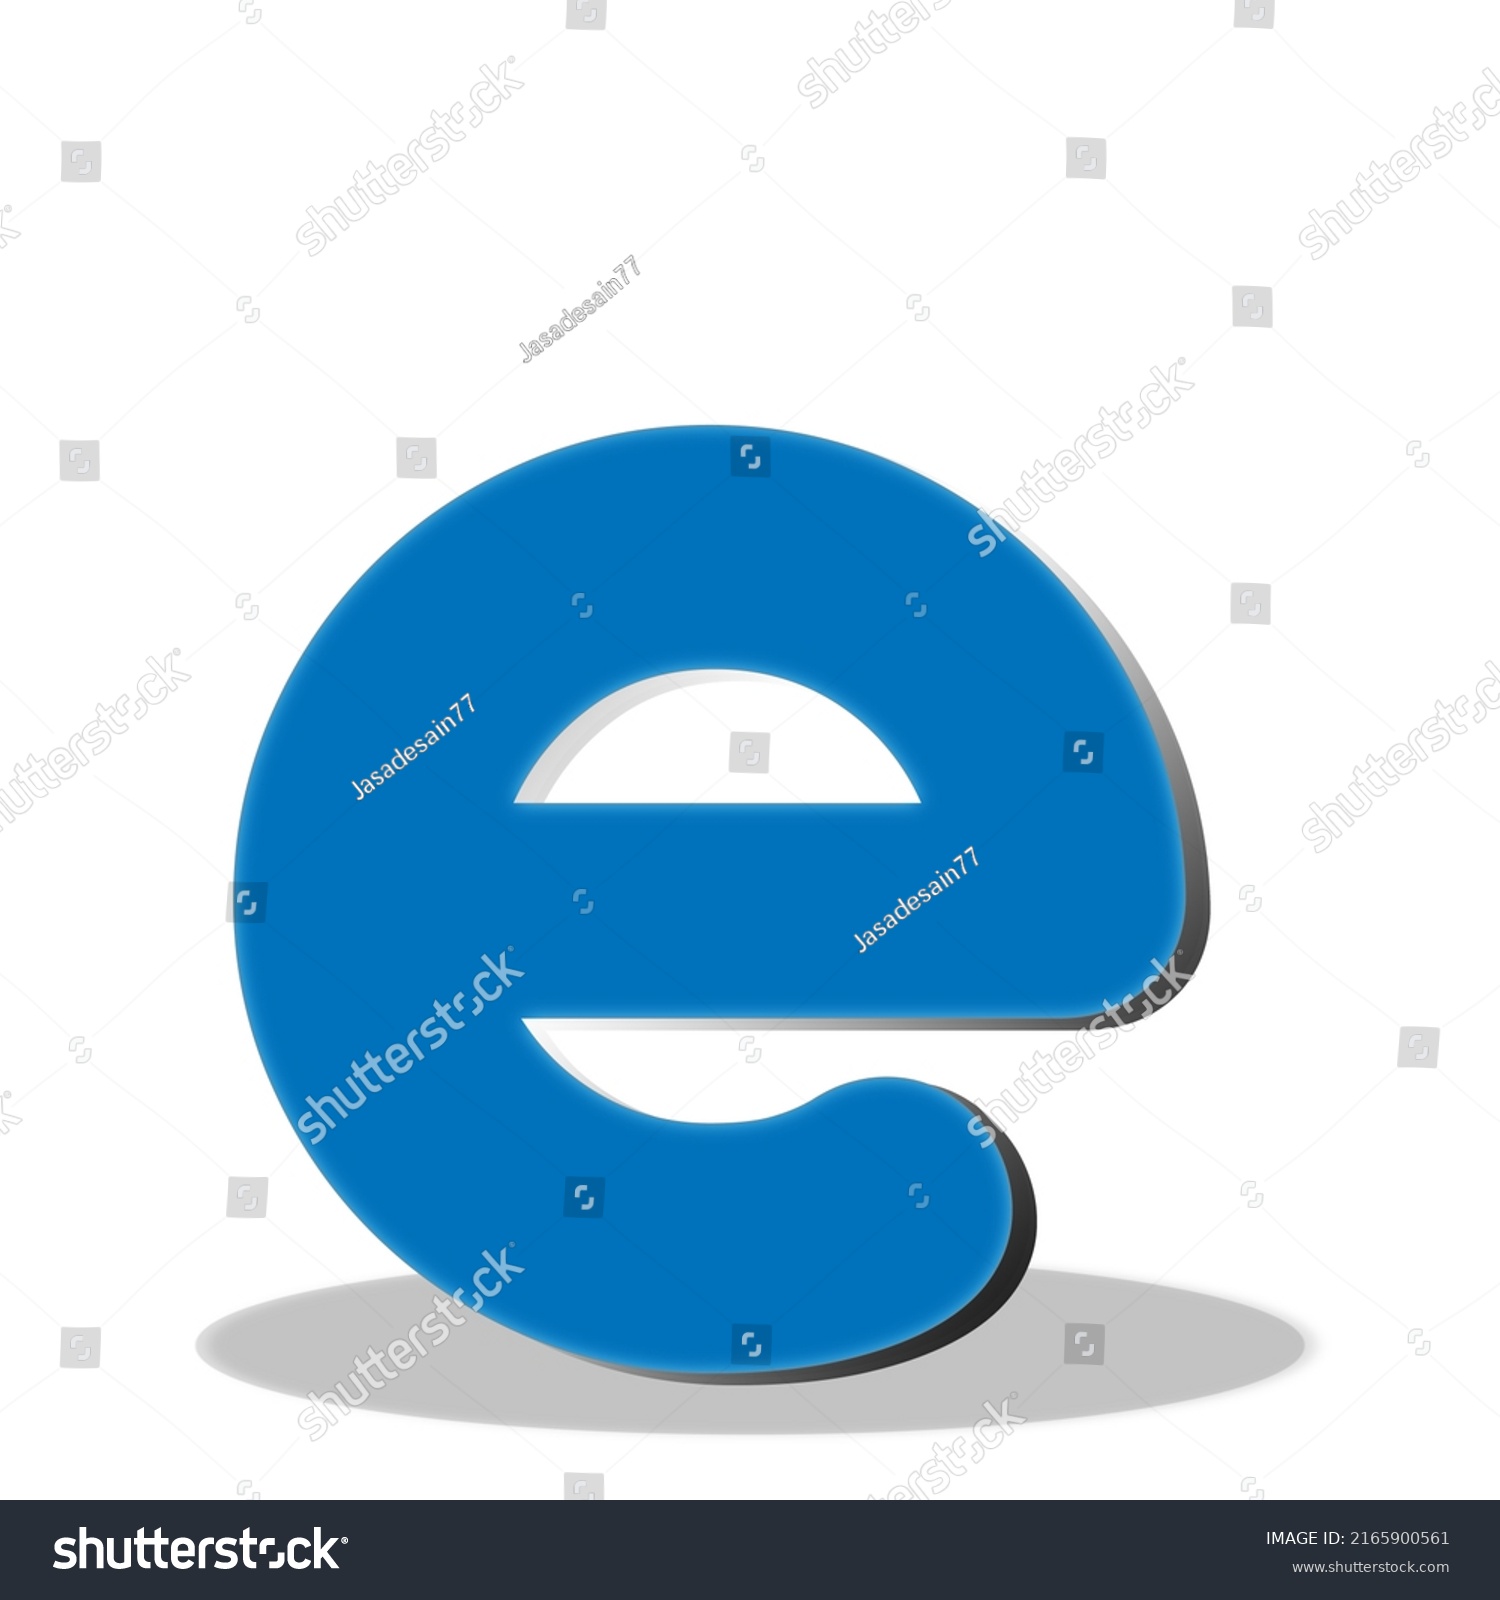 lowercase-letter-e-blue-commonly-used-stock-illustration-2165900561